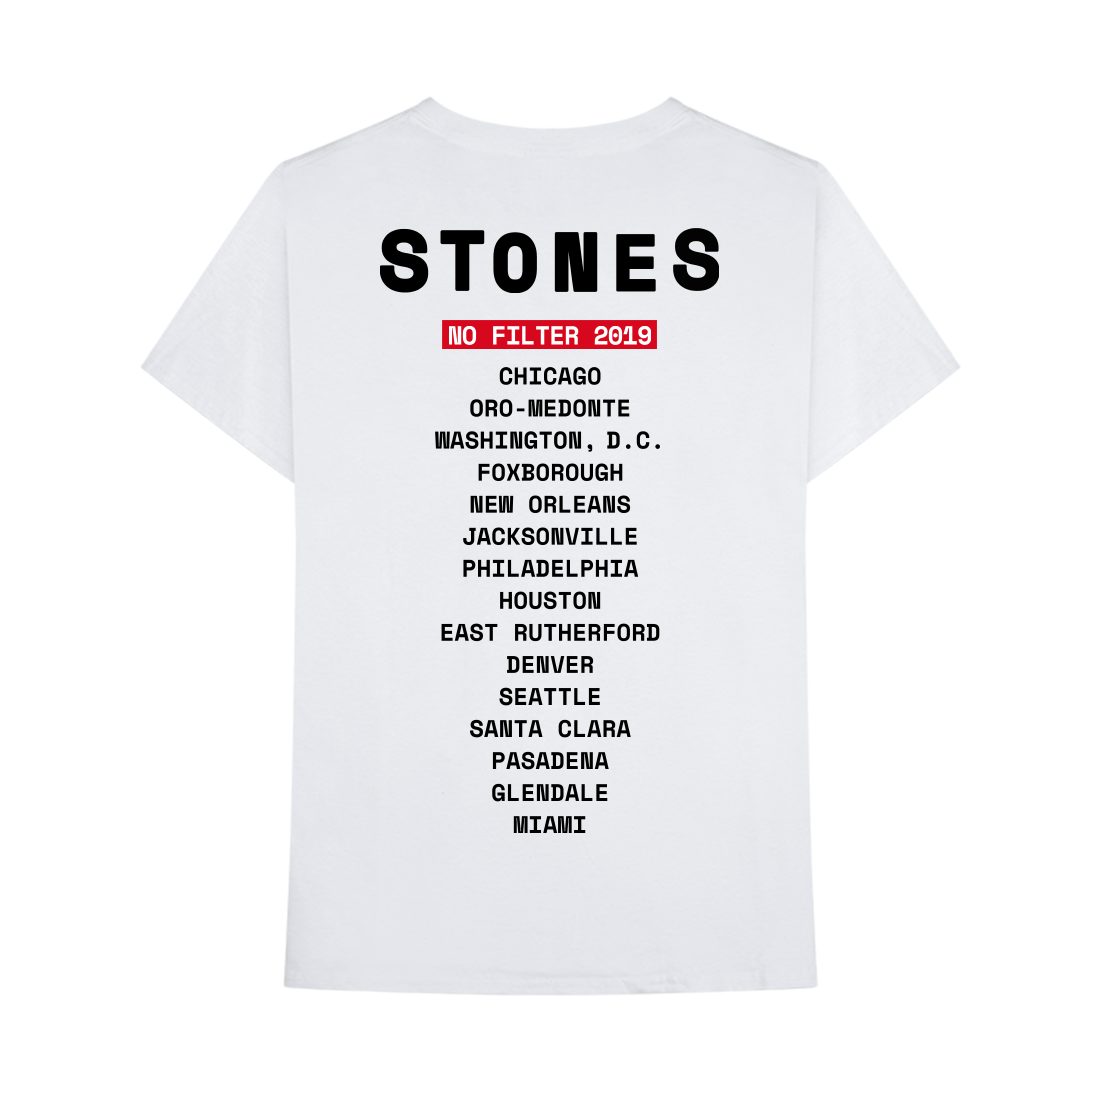 Rolling Stones Tour Shirt 2019 Off 75 Free Shipping - adidas shirt in roblox off 75 free shipping